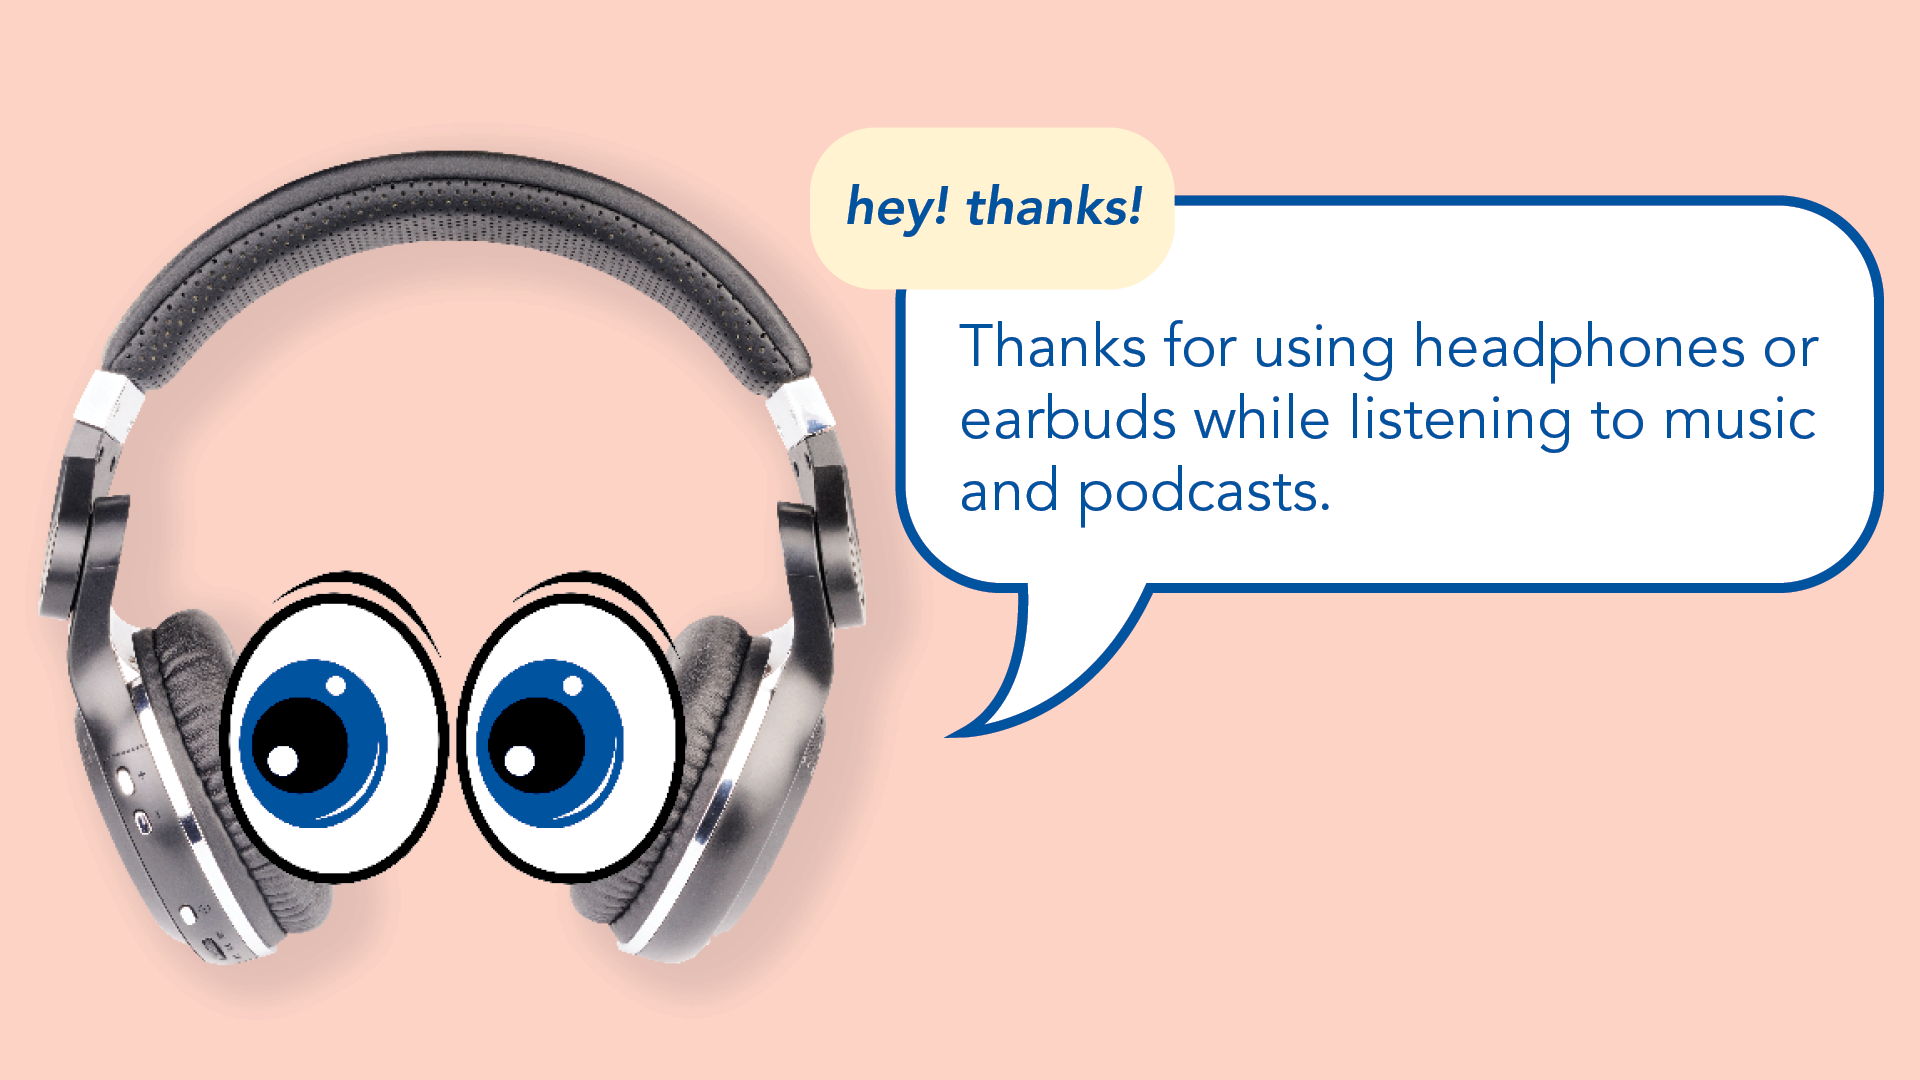 Illustration: headphones with eyes with text in a bubble